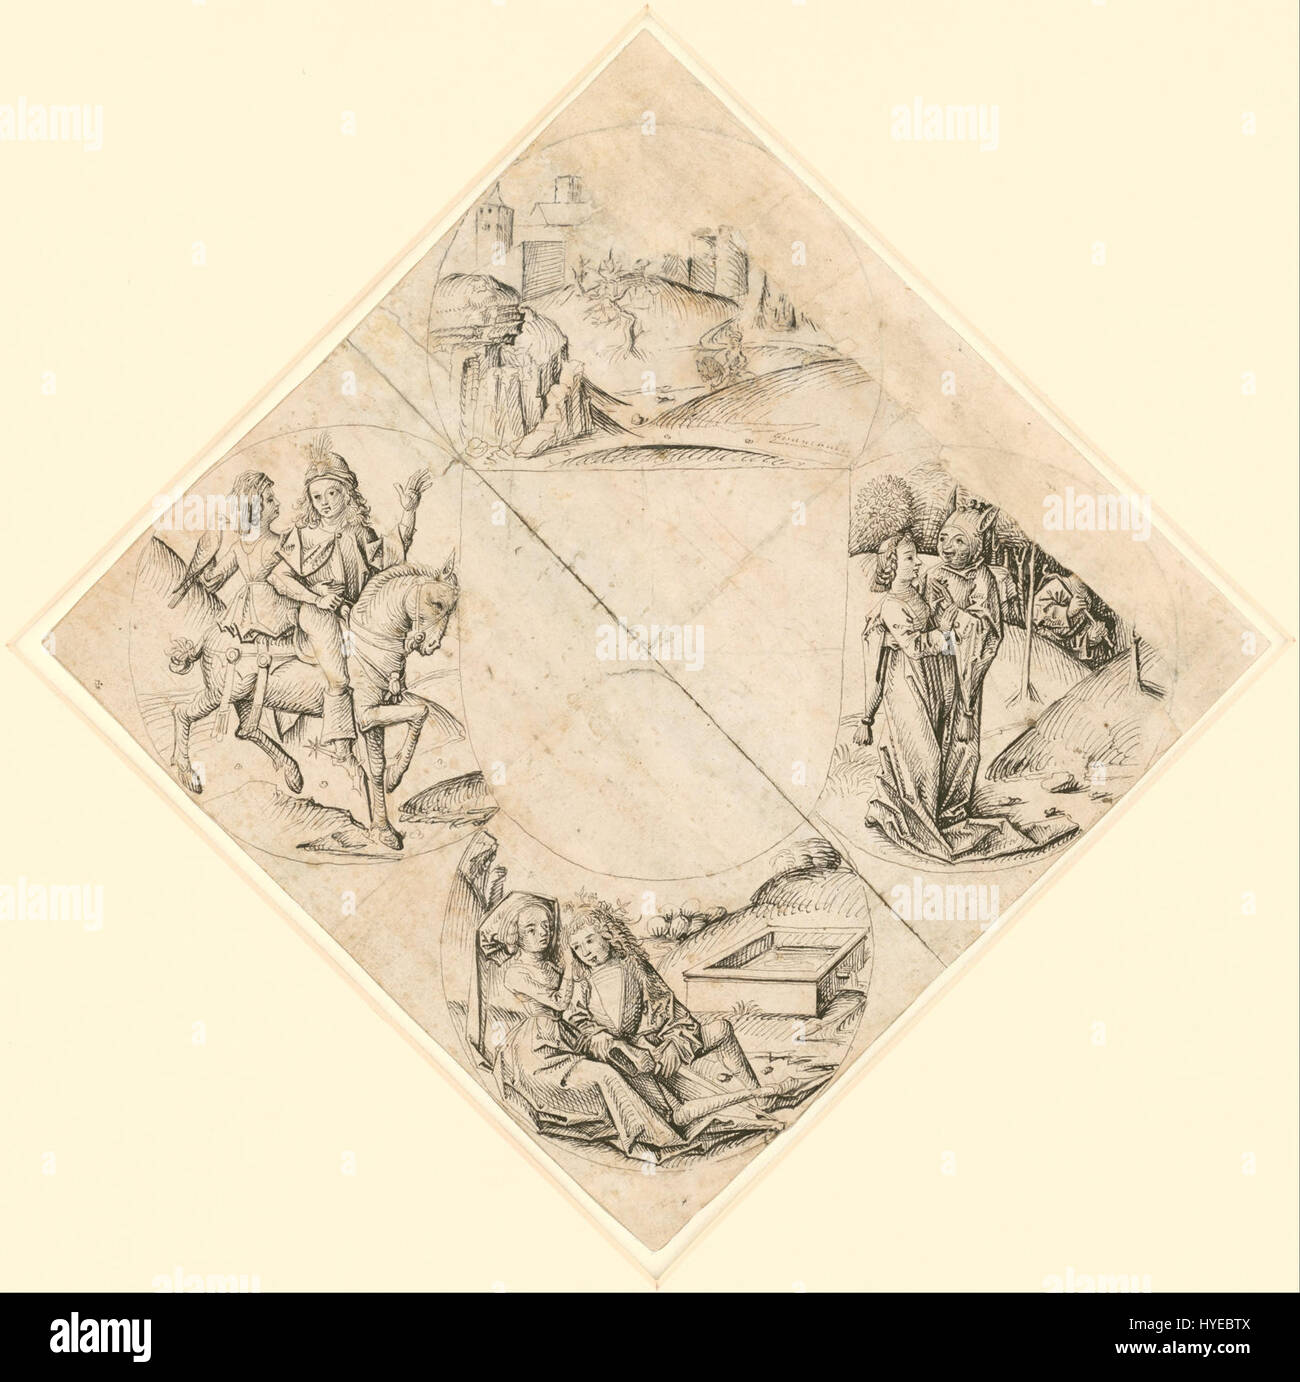 After The Master of the Housebook (German, active about 1470   1500)   Design for a Quatrefoil with a Castle, Two Lovers, a Maiden Tempted by a Fool, a Couple Seated by a ...   Google Art Project Stock Photo